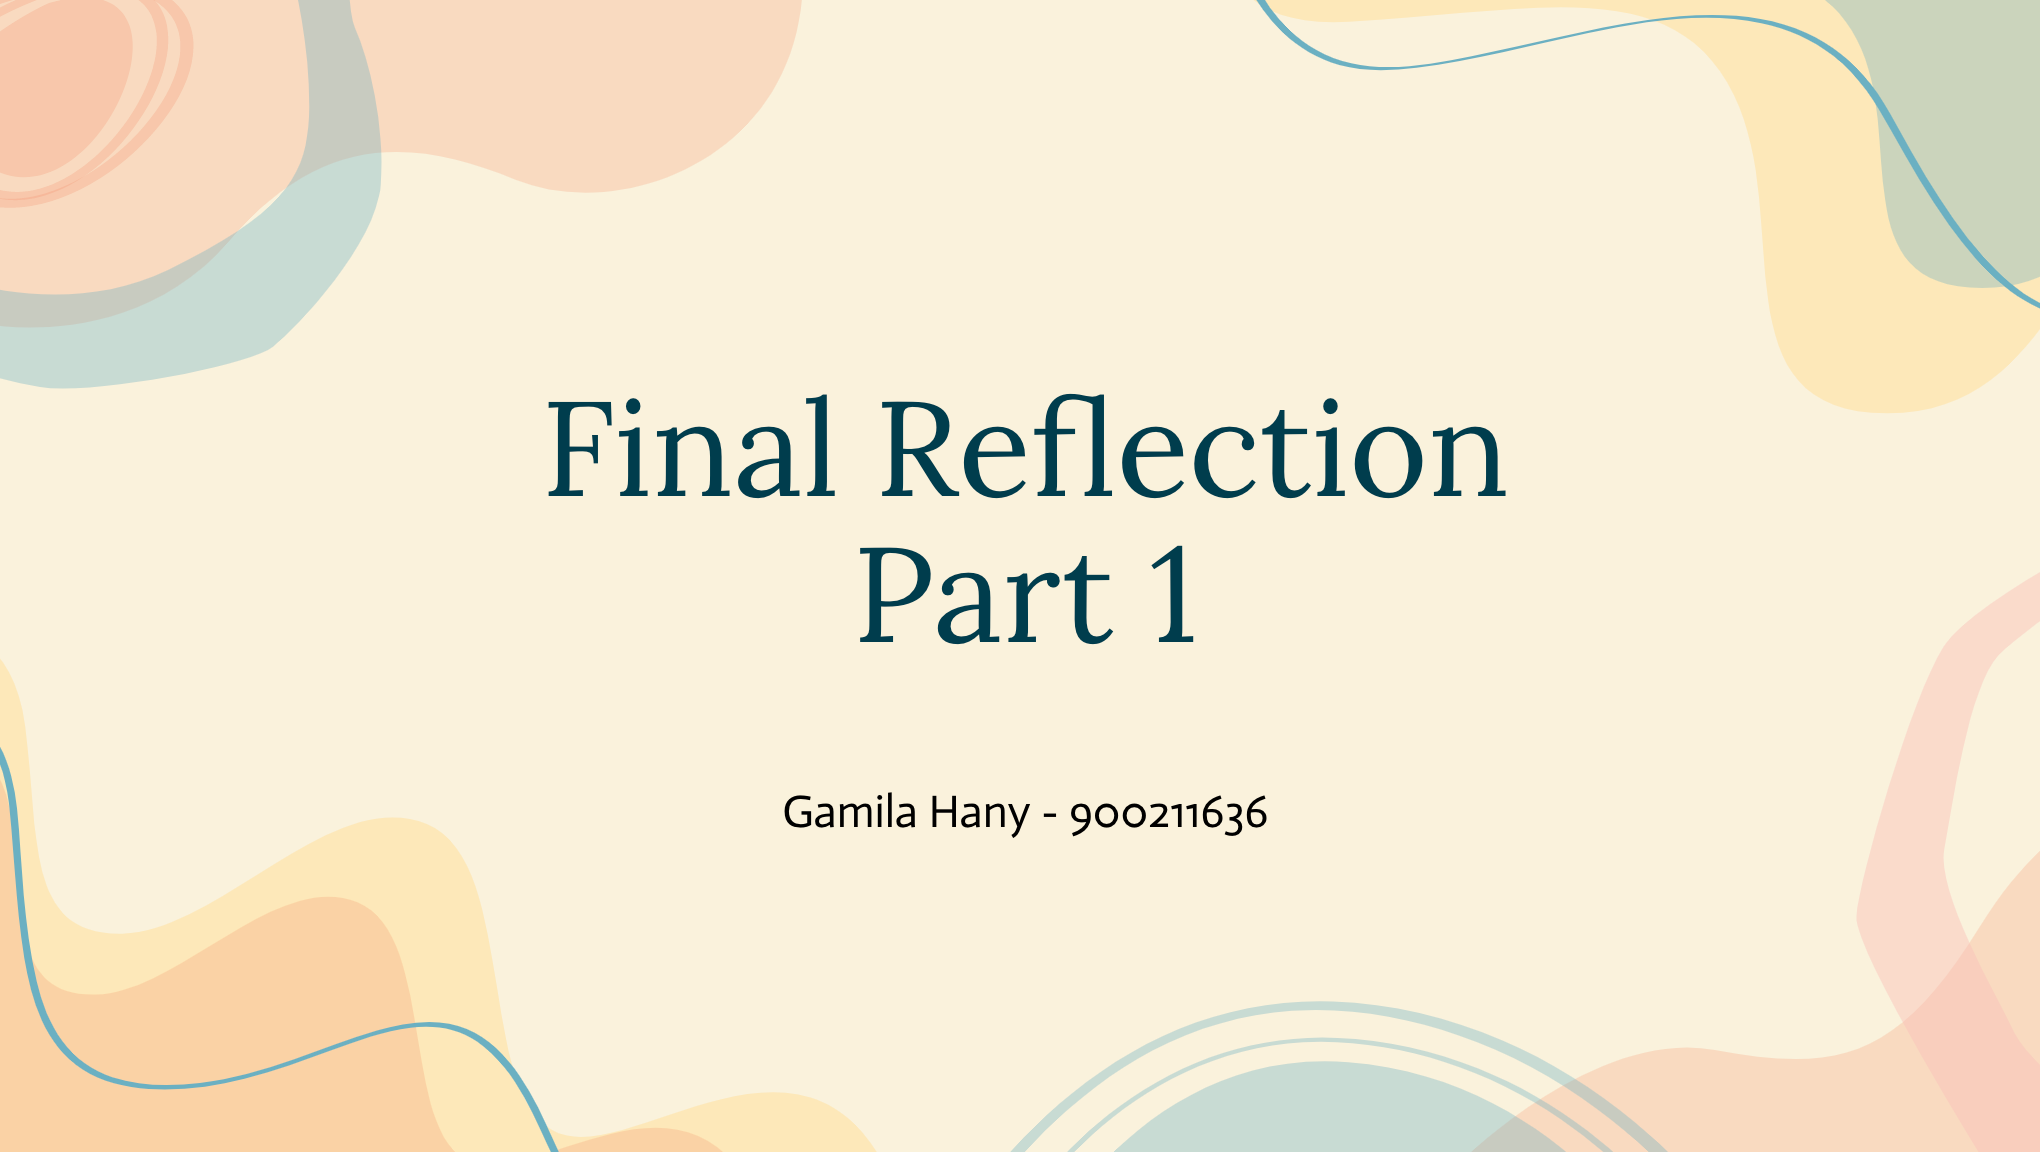 The first slide of my presentation, includes the title "Final Reflection Part 1"